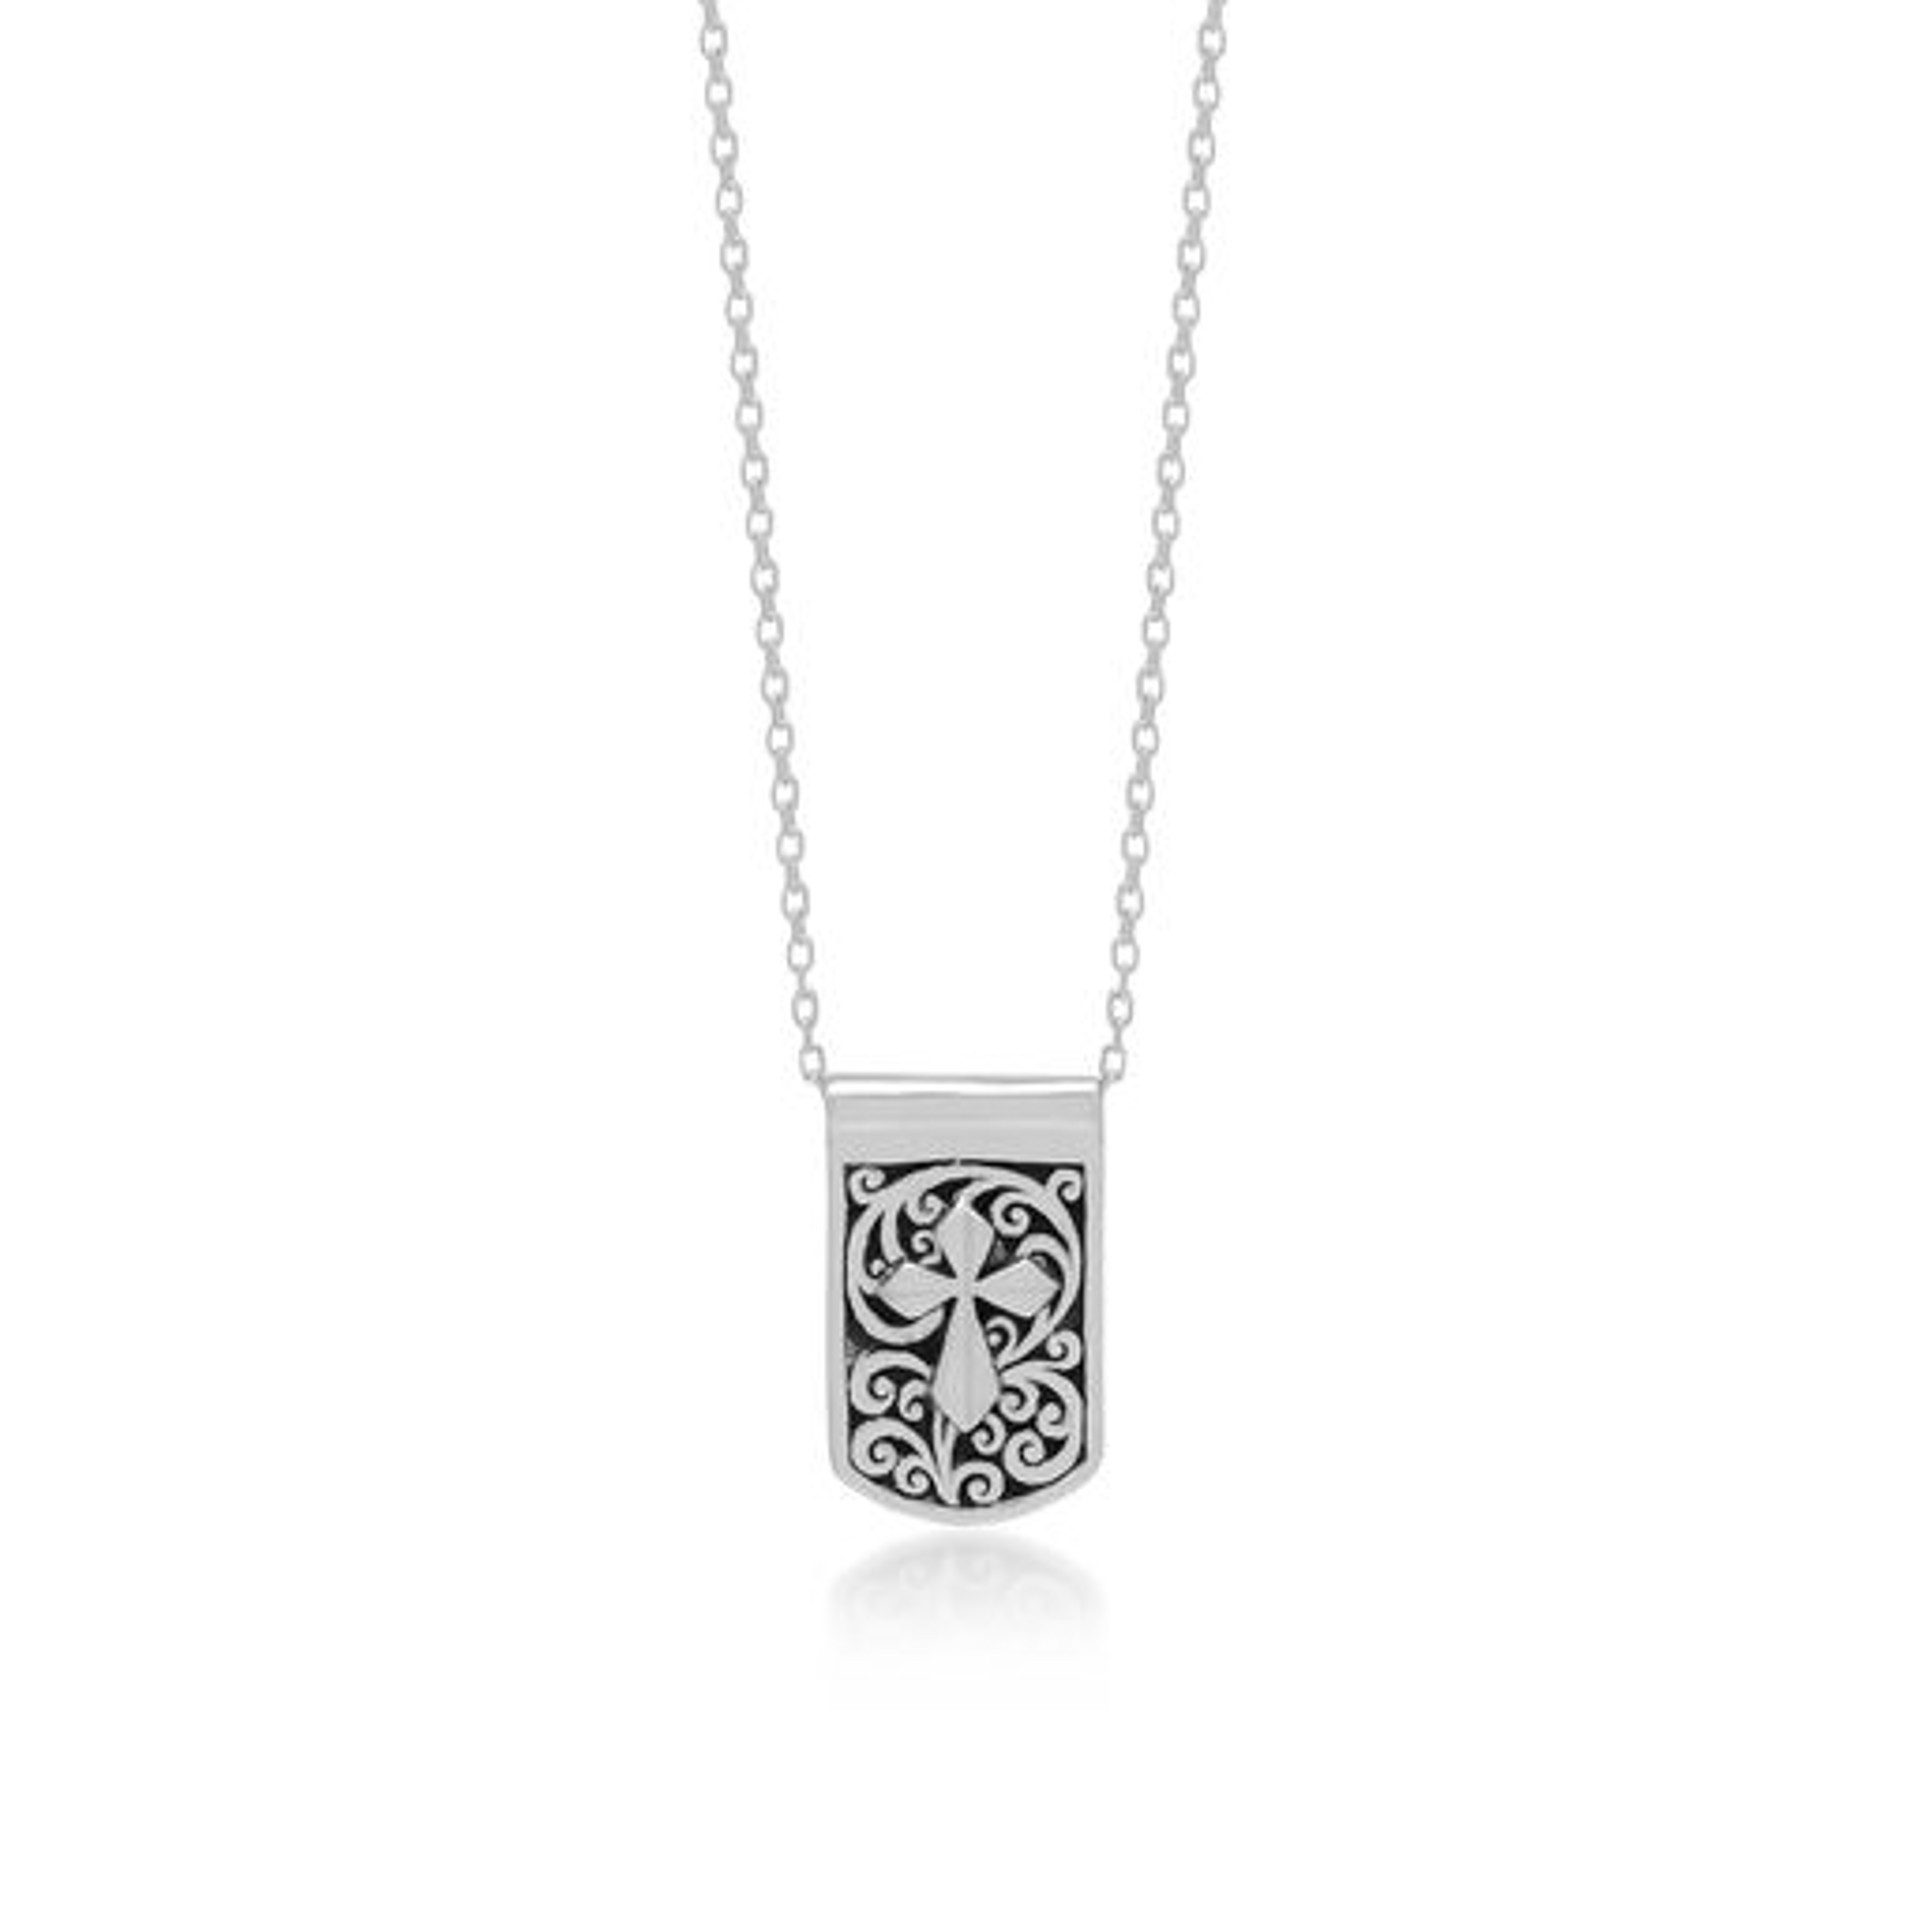 6981 Cross Detail on Signature Scroll Pendent Necklace by Lois Hill